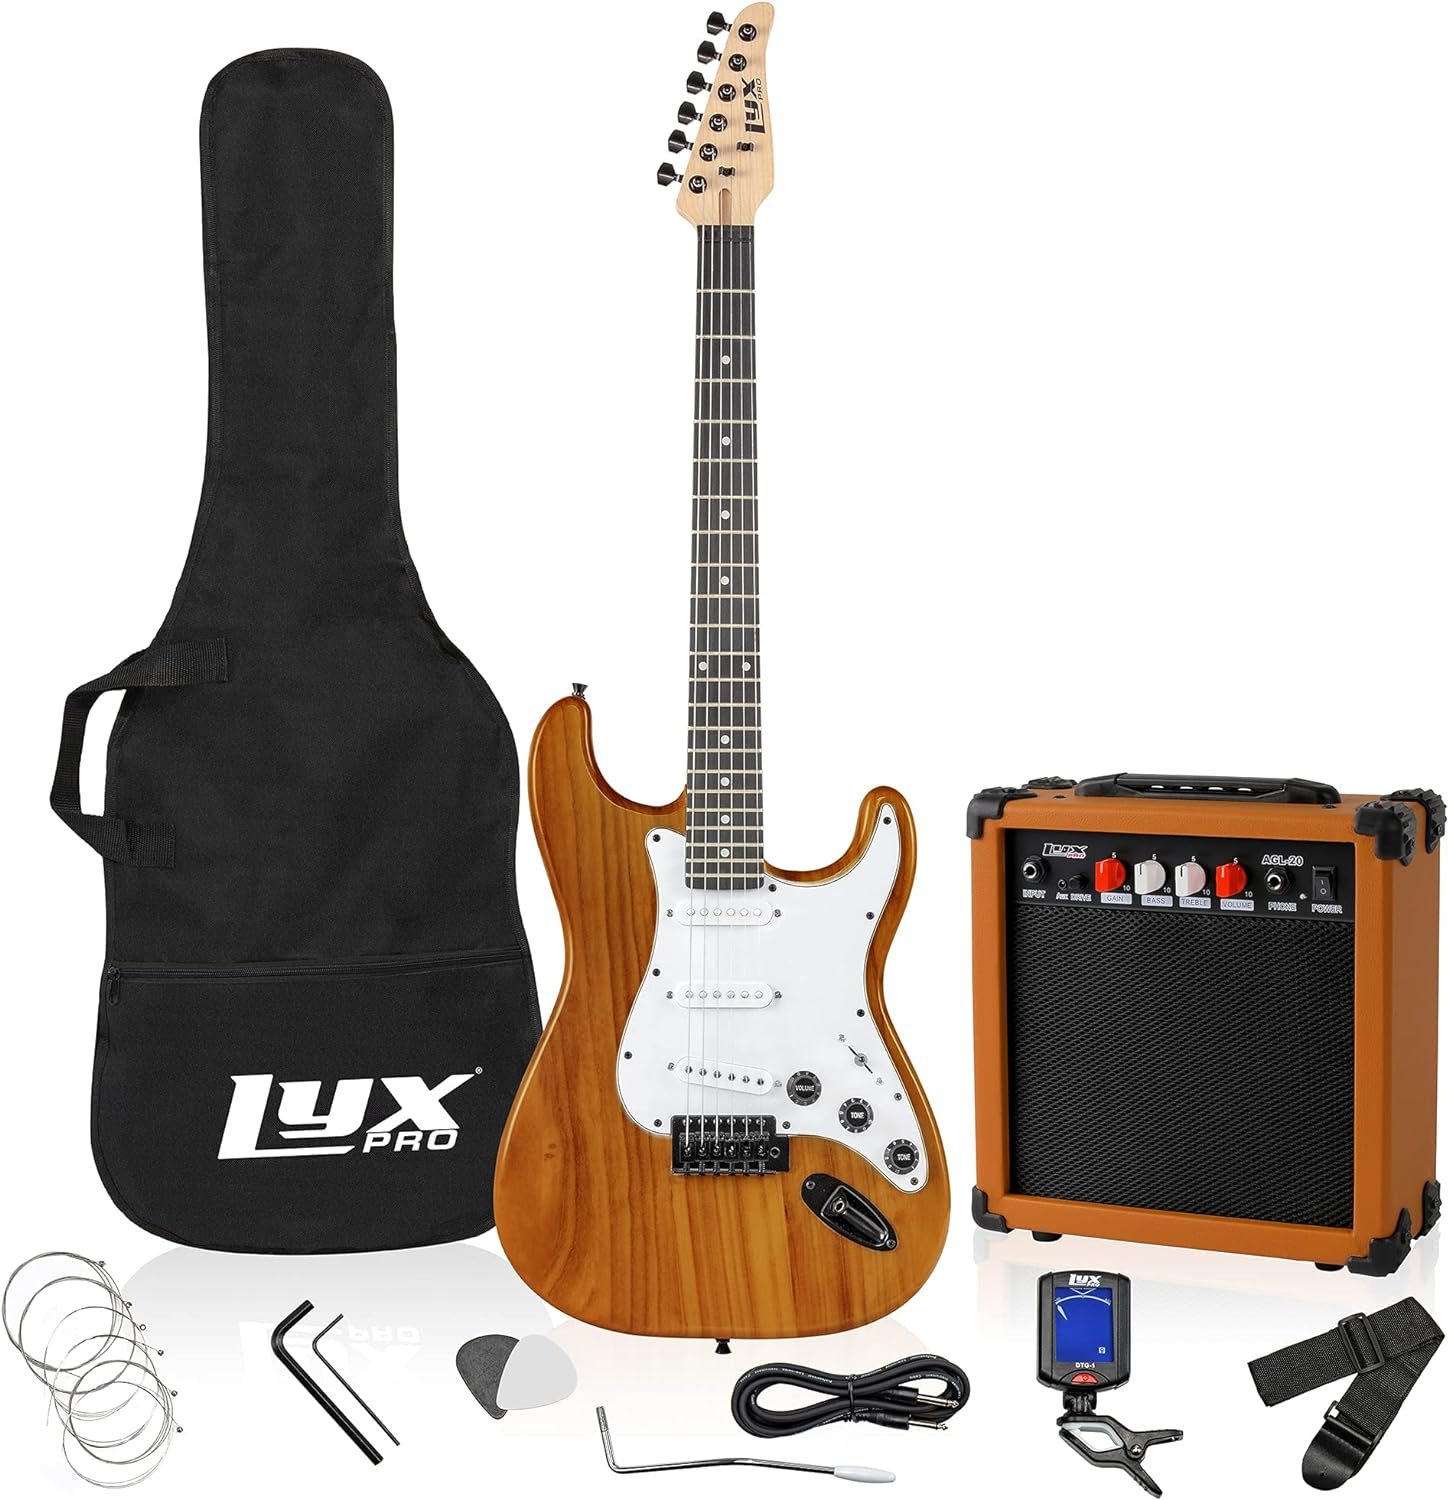 LyxPro 39 inch Electric Guitar Kit Bundle with 20w Amplifier, All Accessories, Digital Clip On Tuner, Six Strings, Two Picks, Tremolo Bar, Shoulder Strap, Case Bag Starter kit Full Size - mahogany